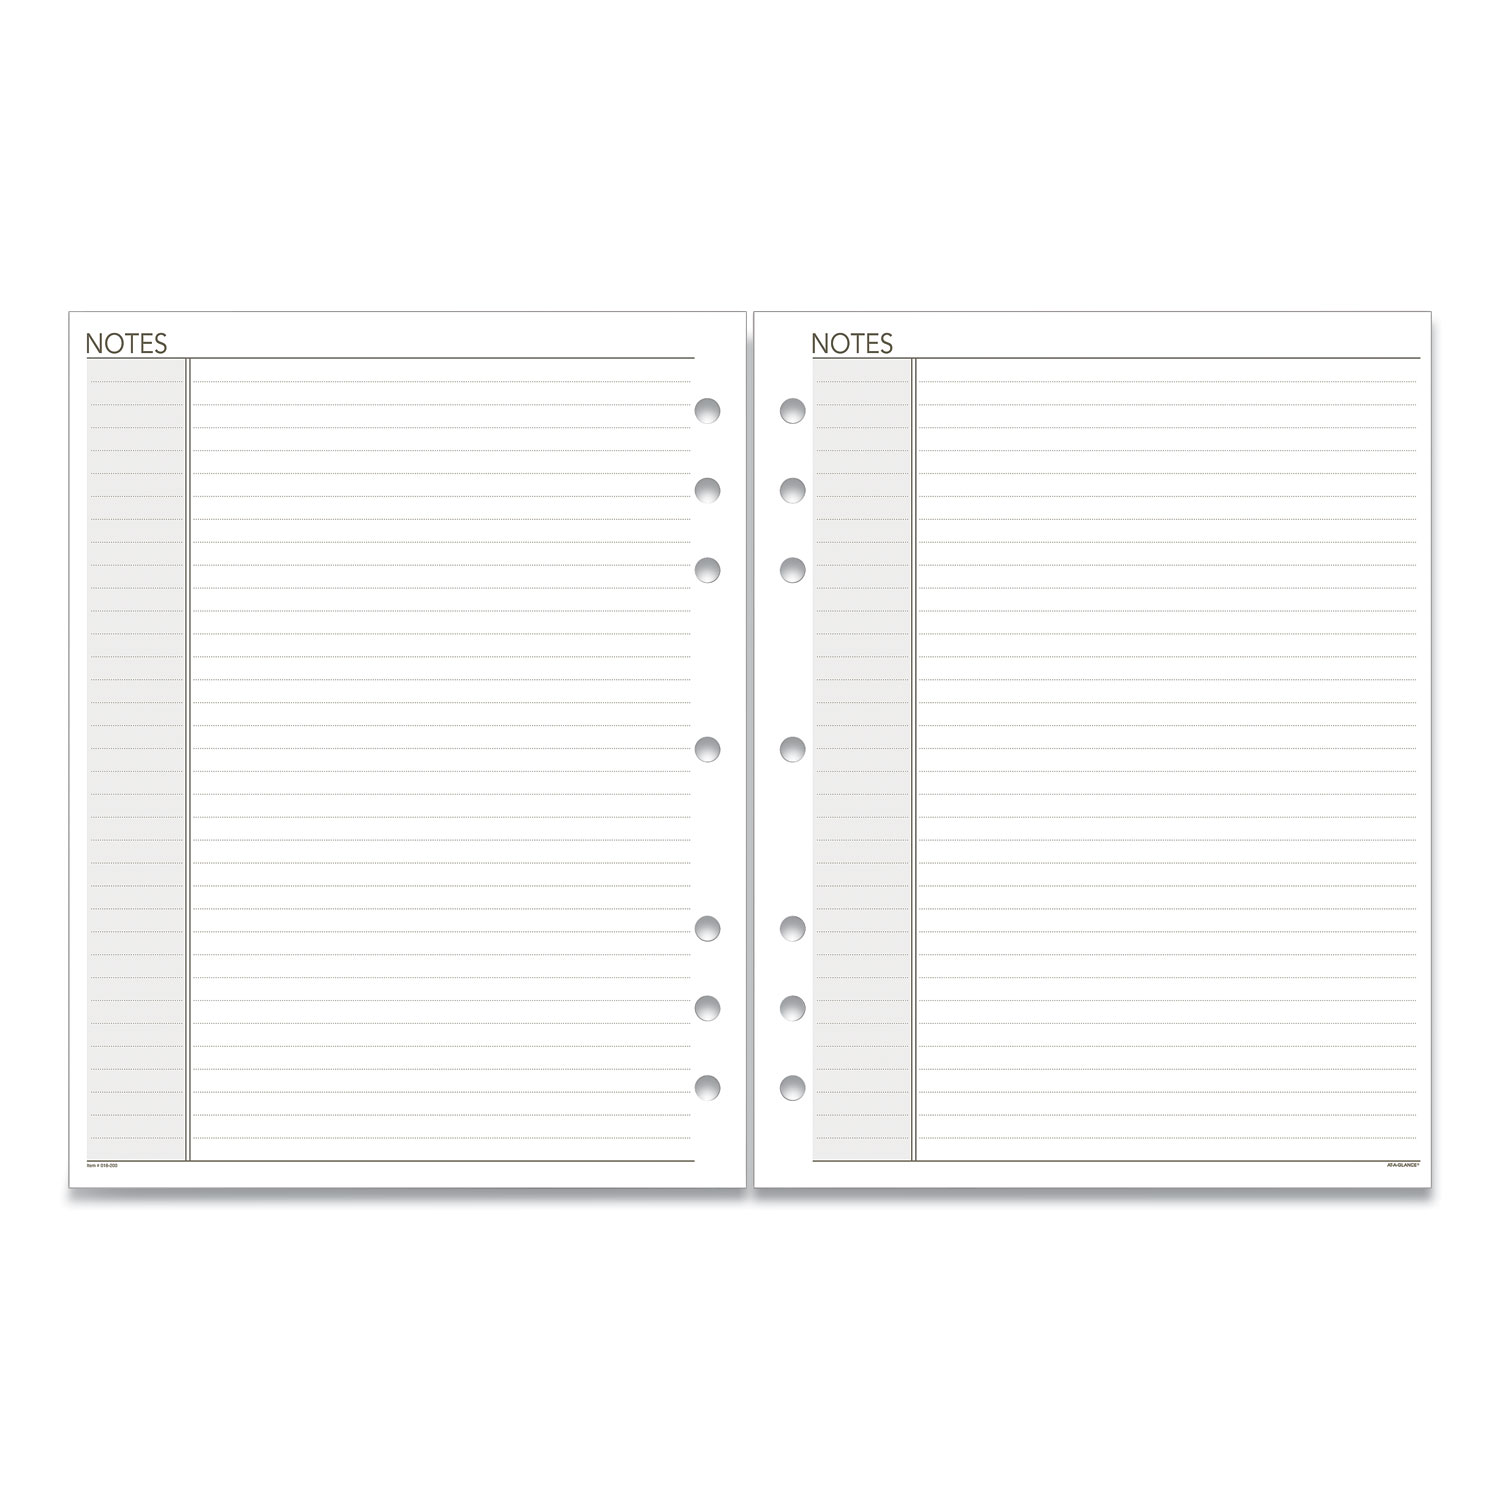 AT-A-GLANCE® Lined Notes Pages, 11 x 8.5, White, 30/Pack